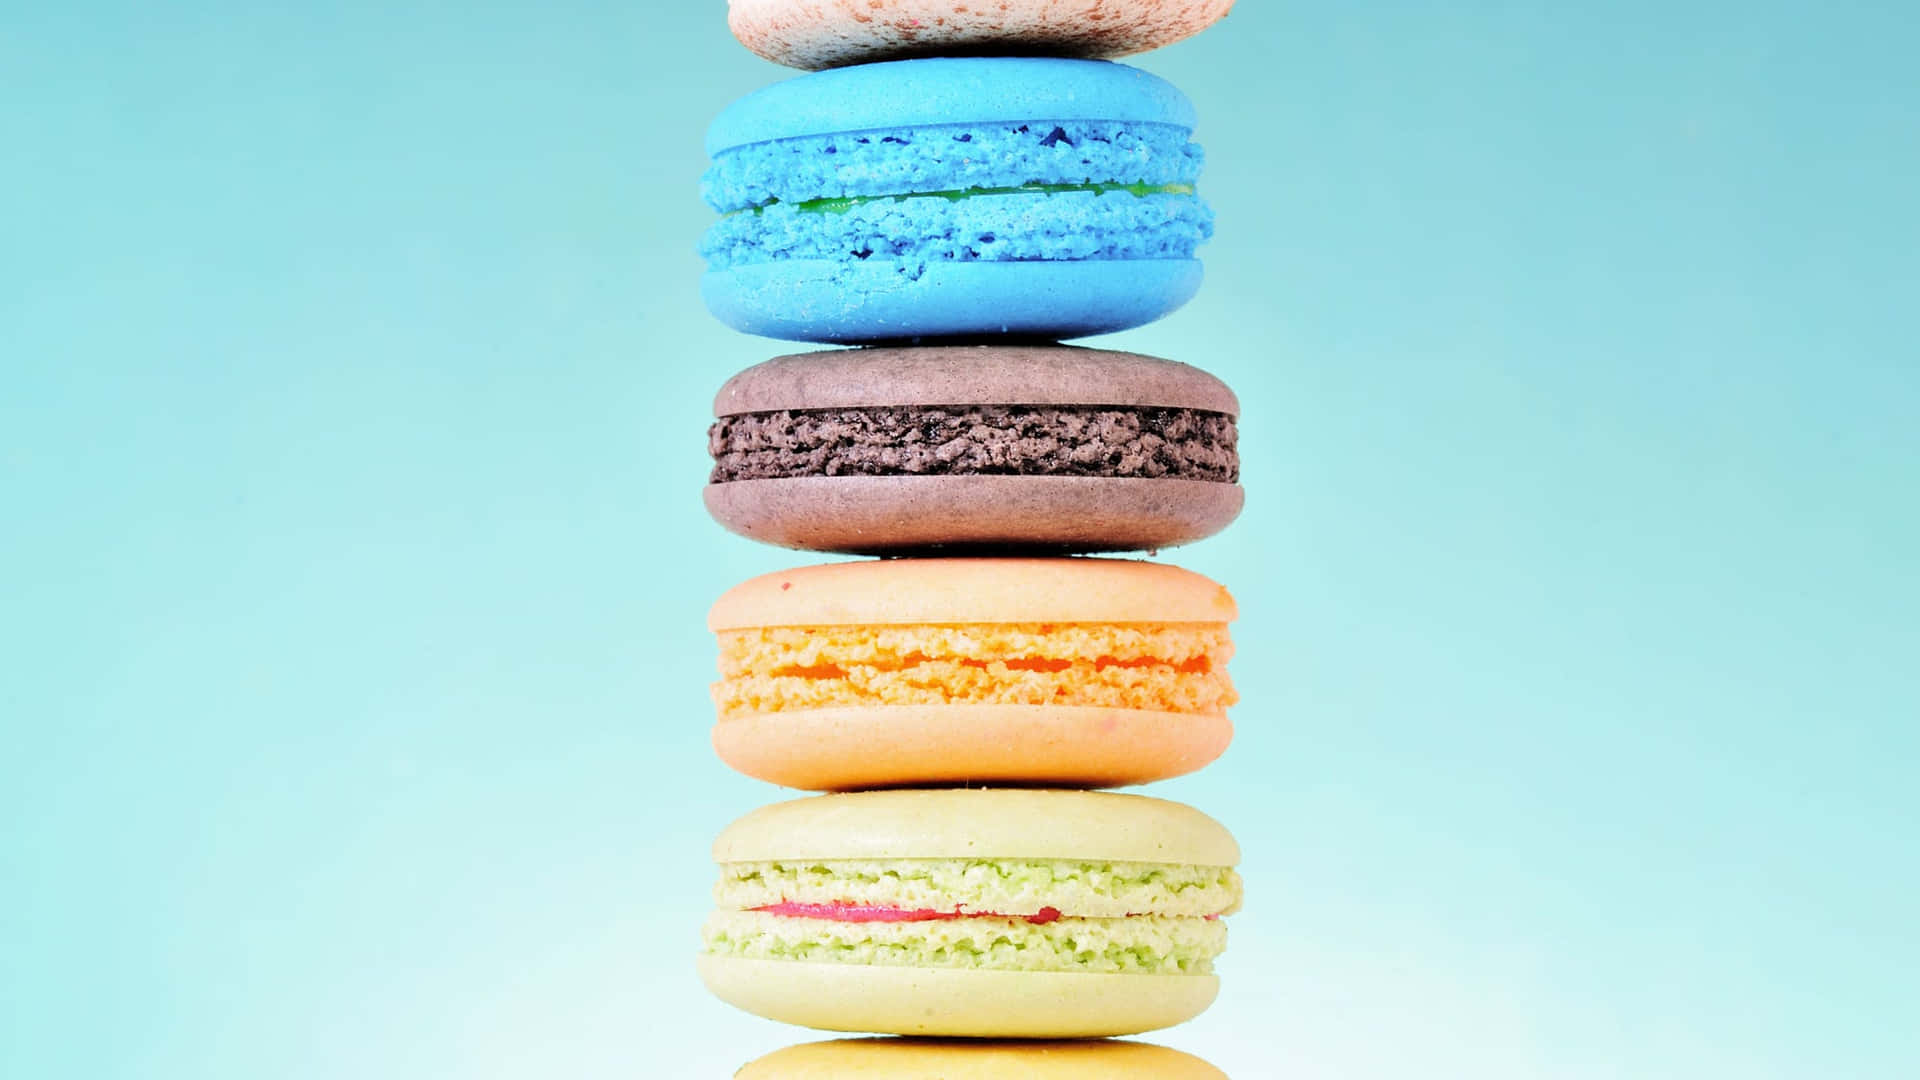 Caption: Colorful and Tasty Macaron Desserts in High Definition Wallpaper